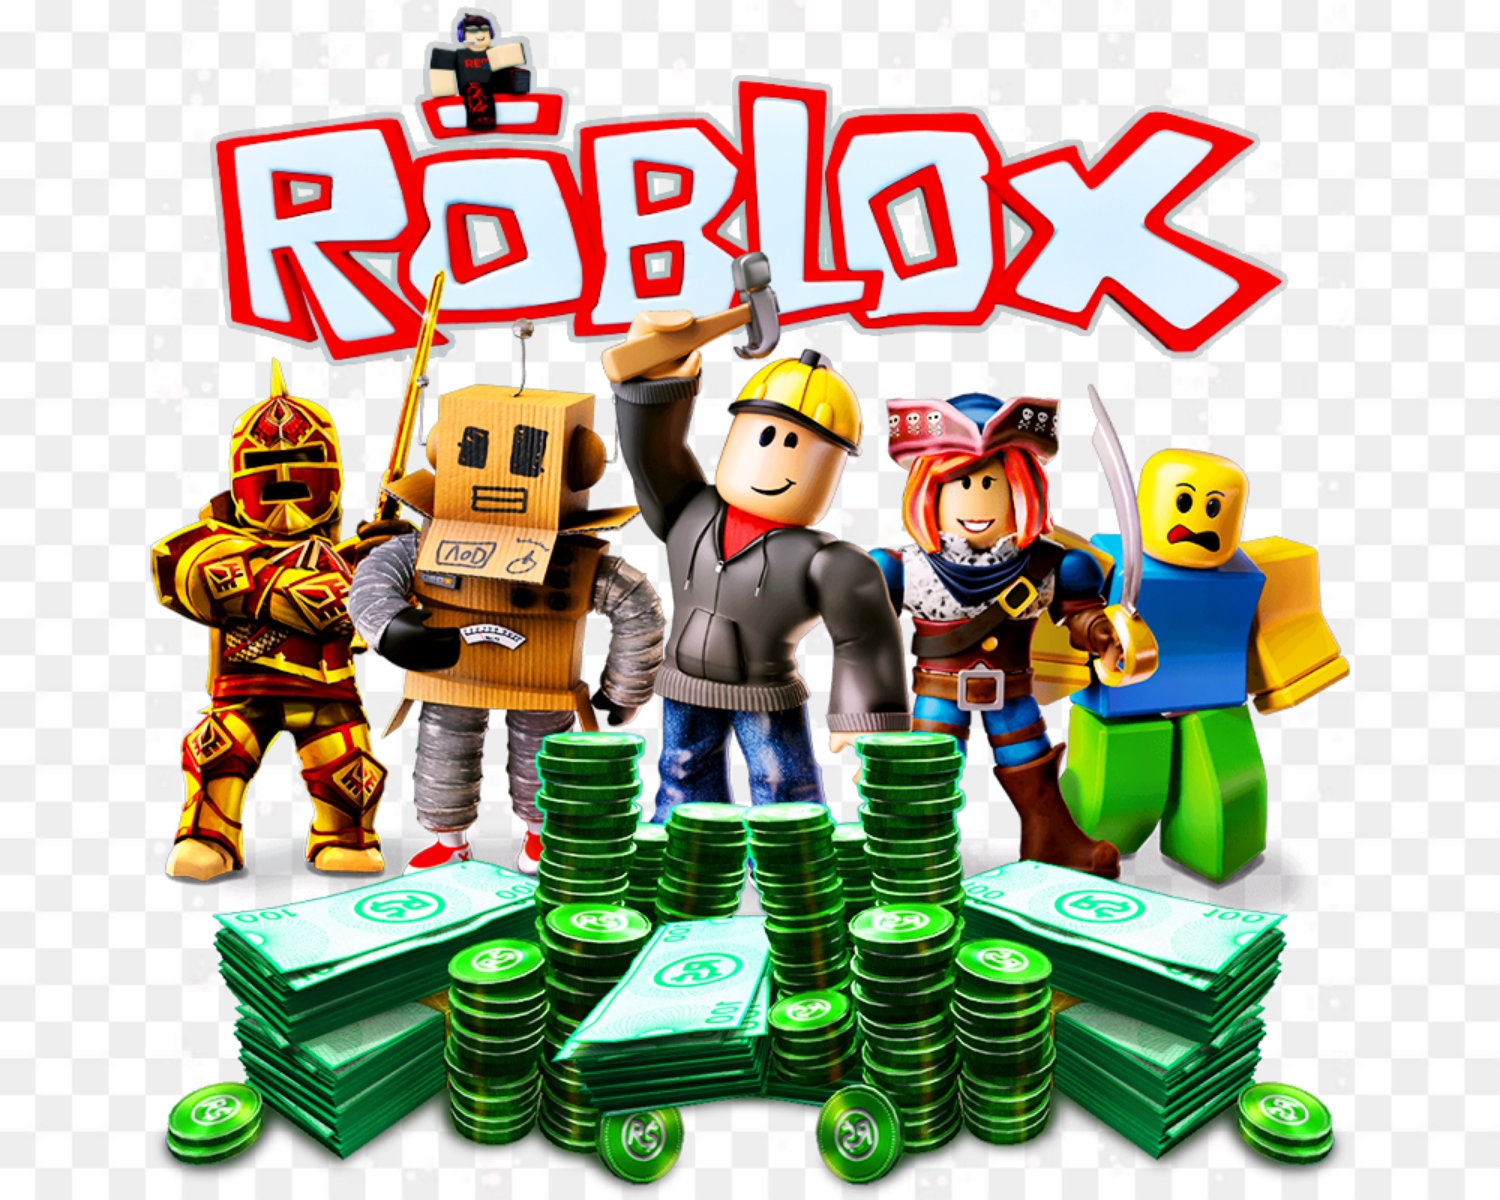 roblox png PNG & clipart images